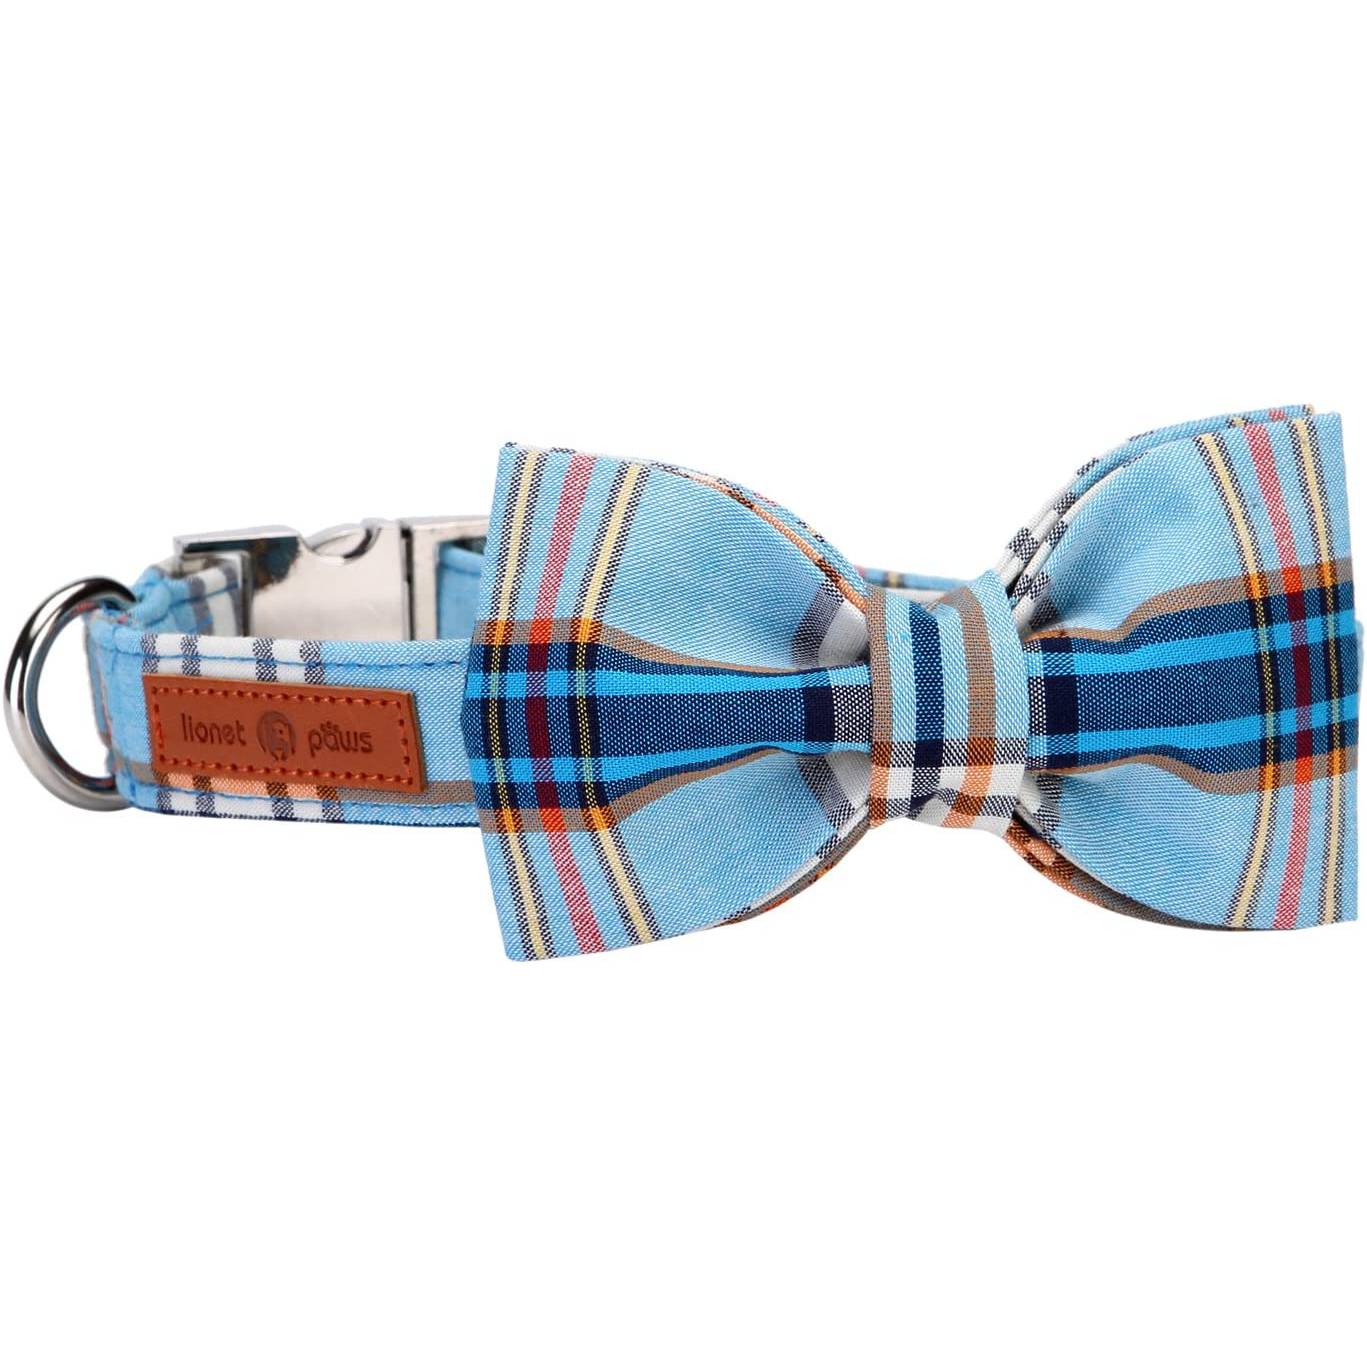 Lionet Paws Dog Collar with Bowtie